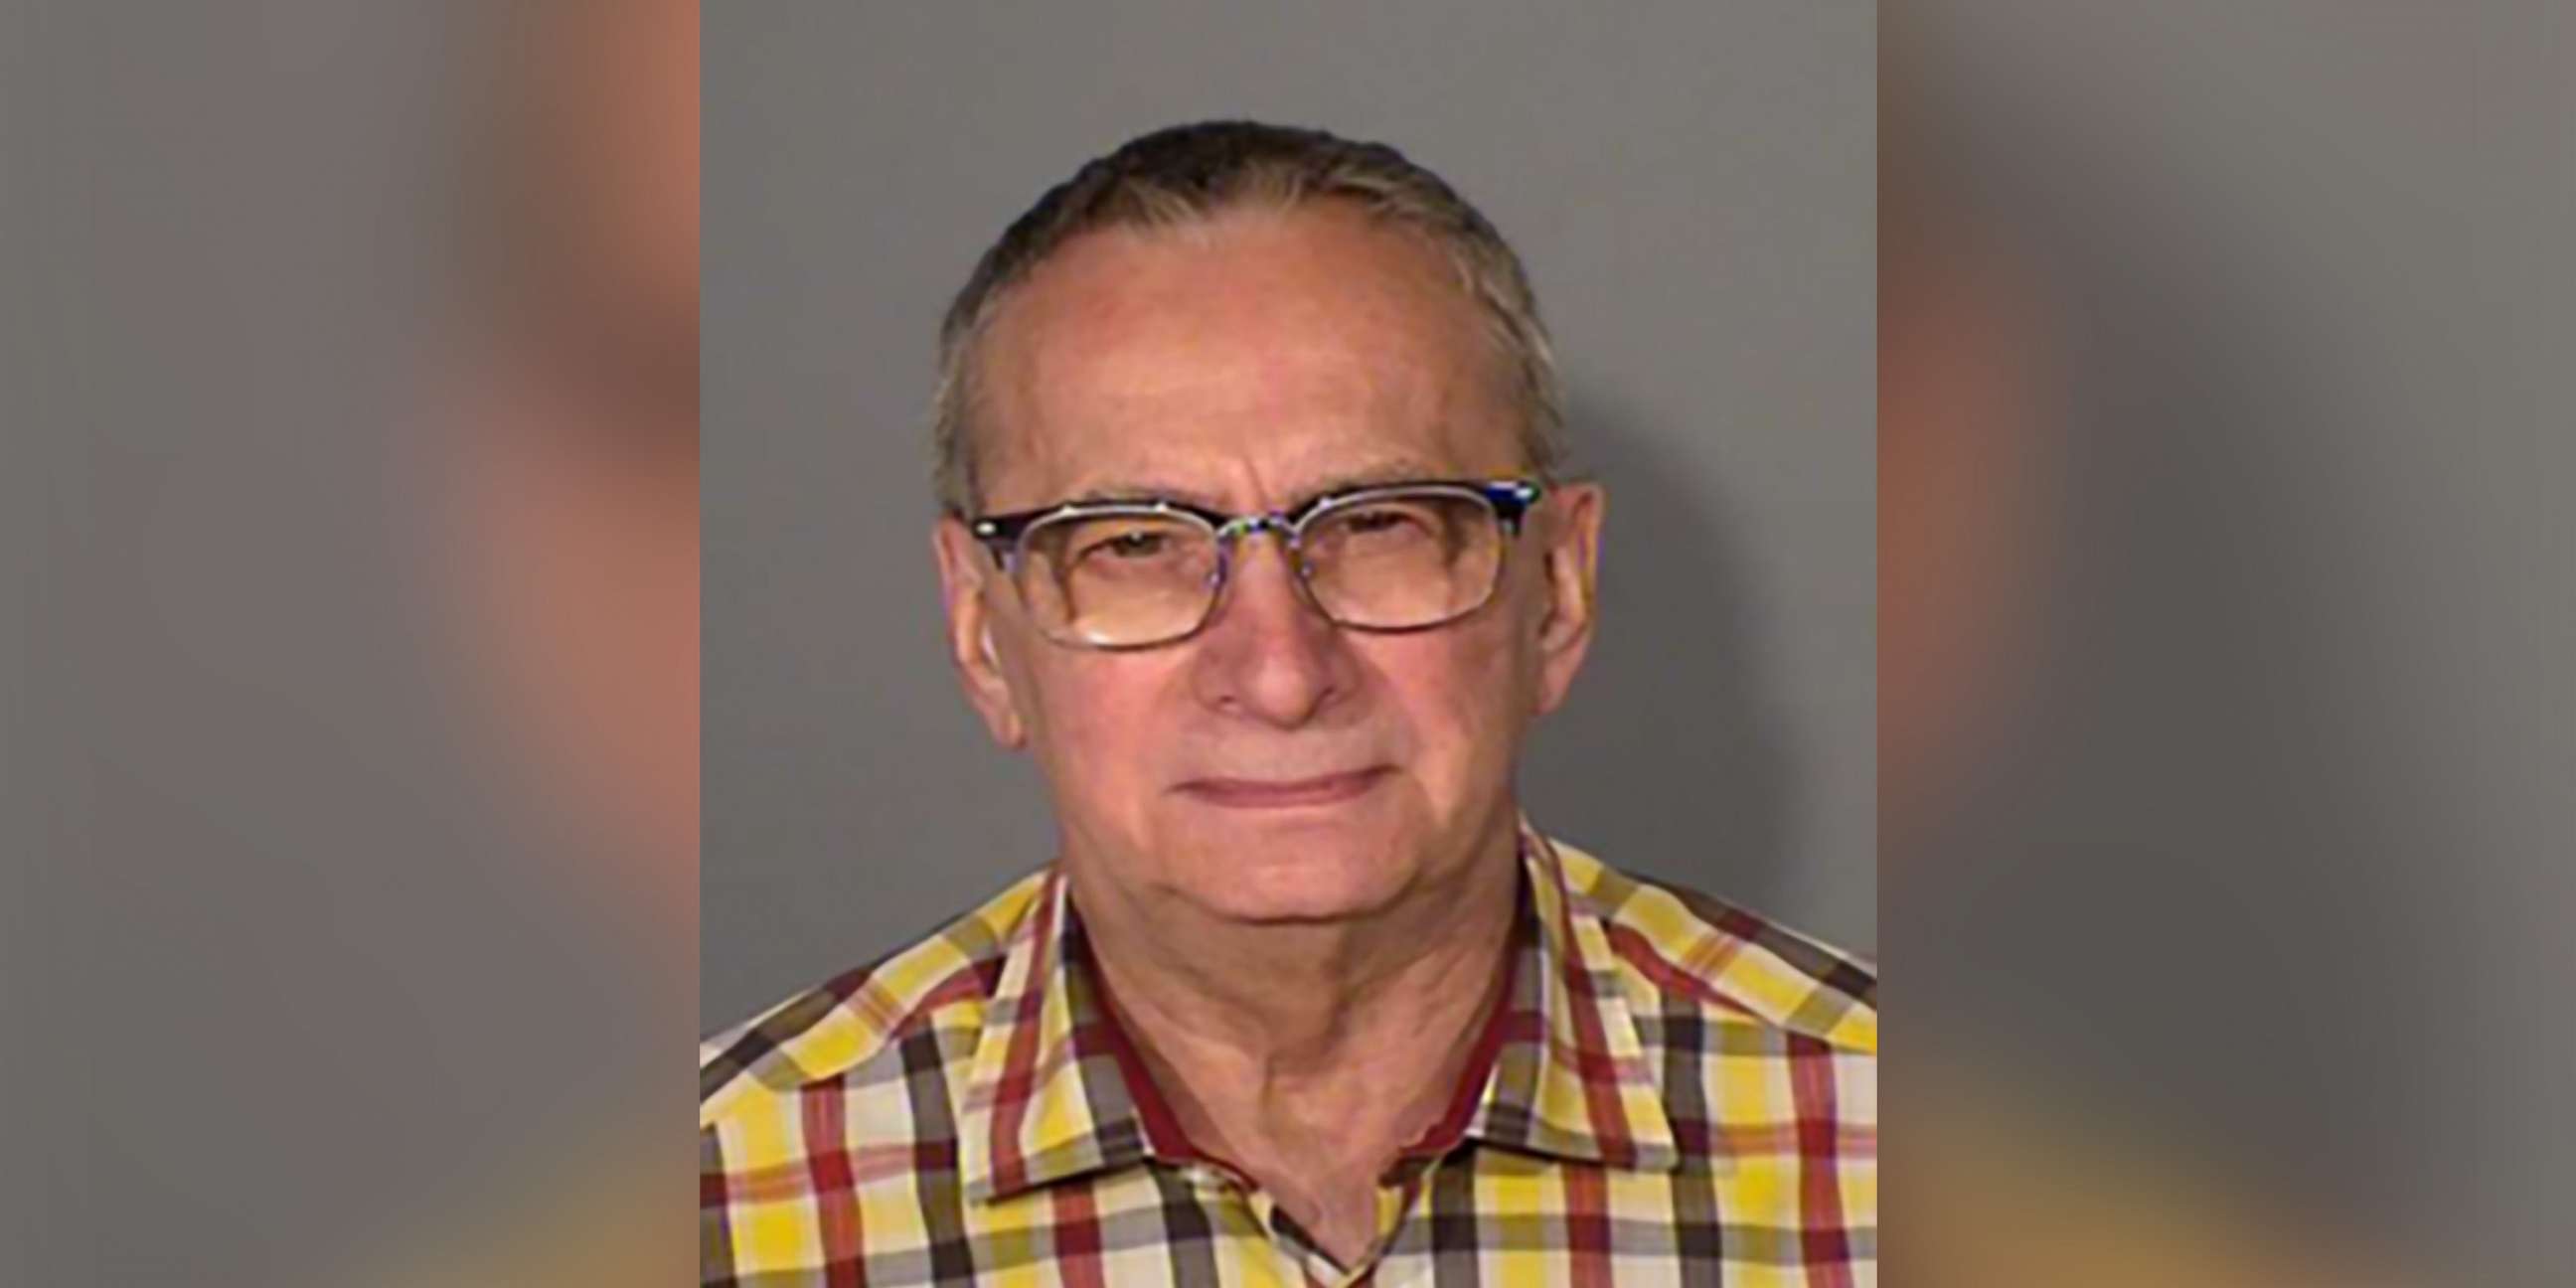 PHOTO: Barry Lee Whelpley, 76, of Mounds View, Minn., is pictured in an undated photo released by the Naperville Police Department in Naperville, Ill., on June 4, 2021.